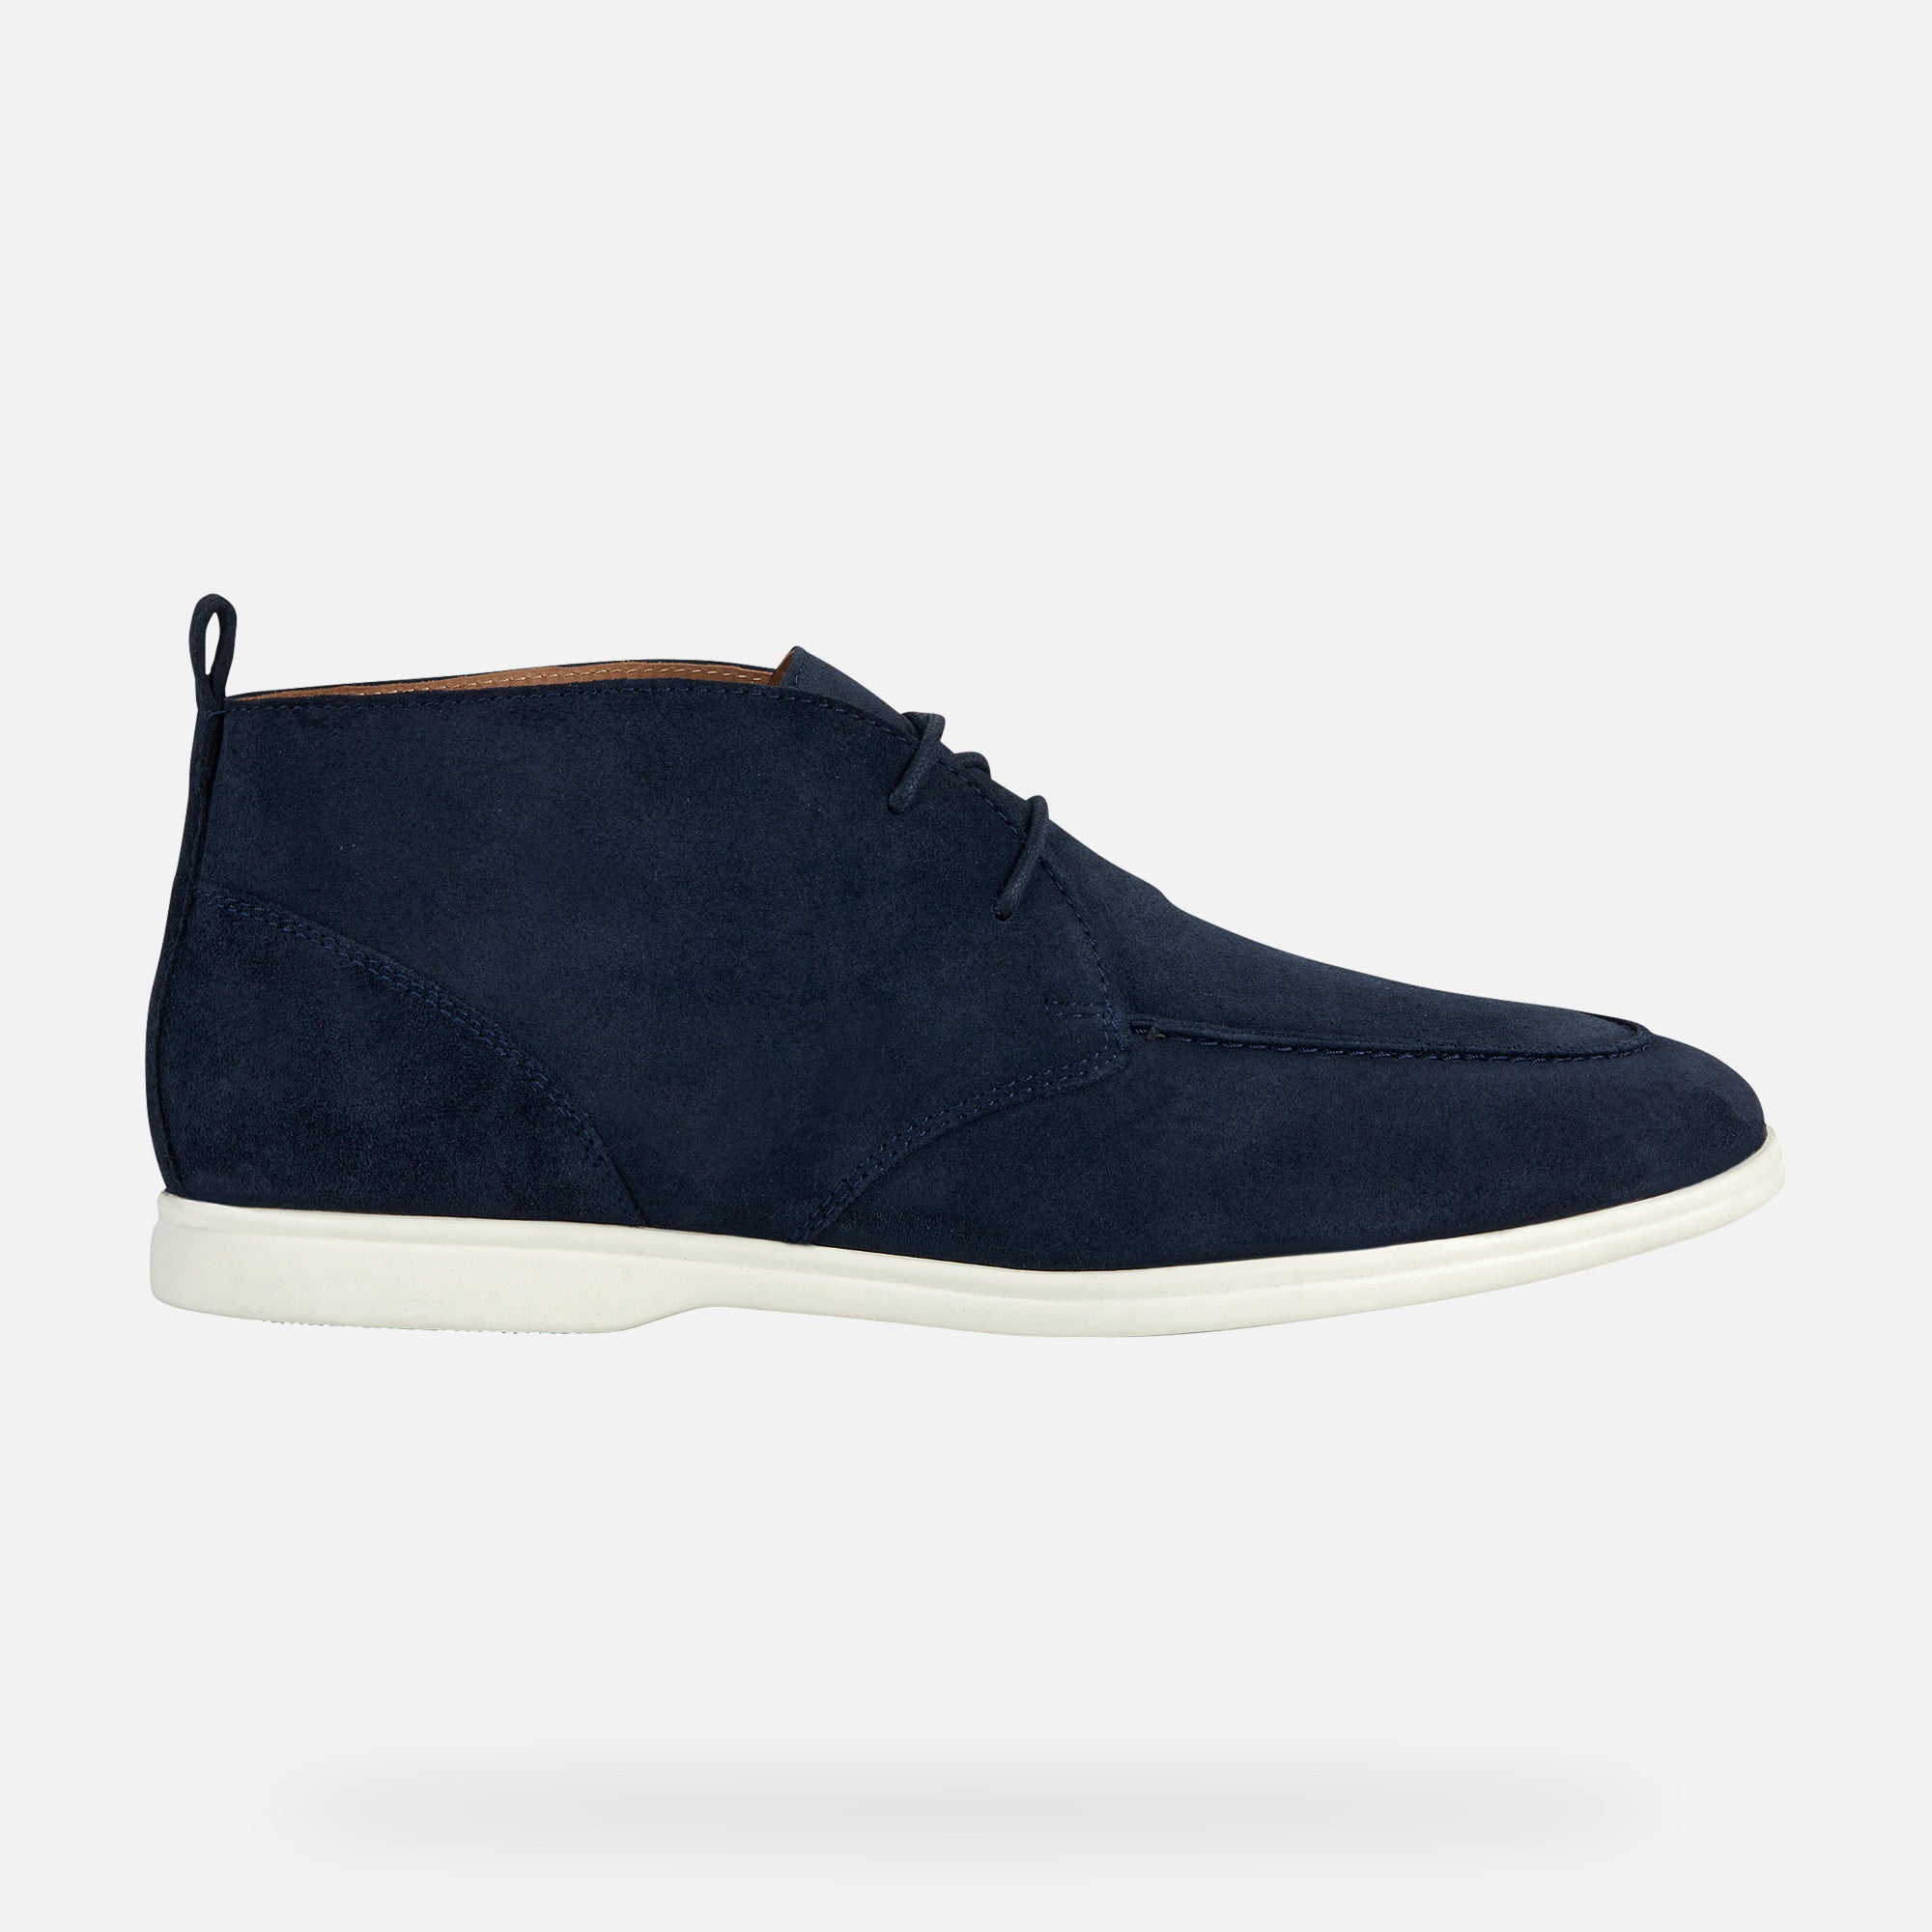 Geox Navy Suede Shoes Venzone Man